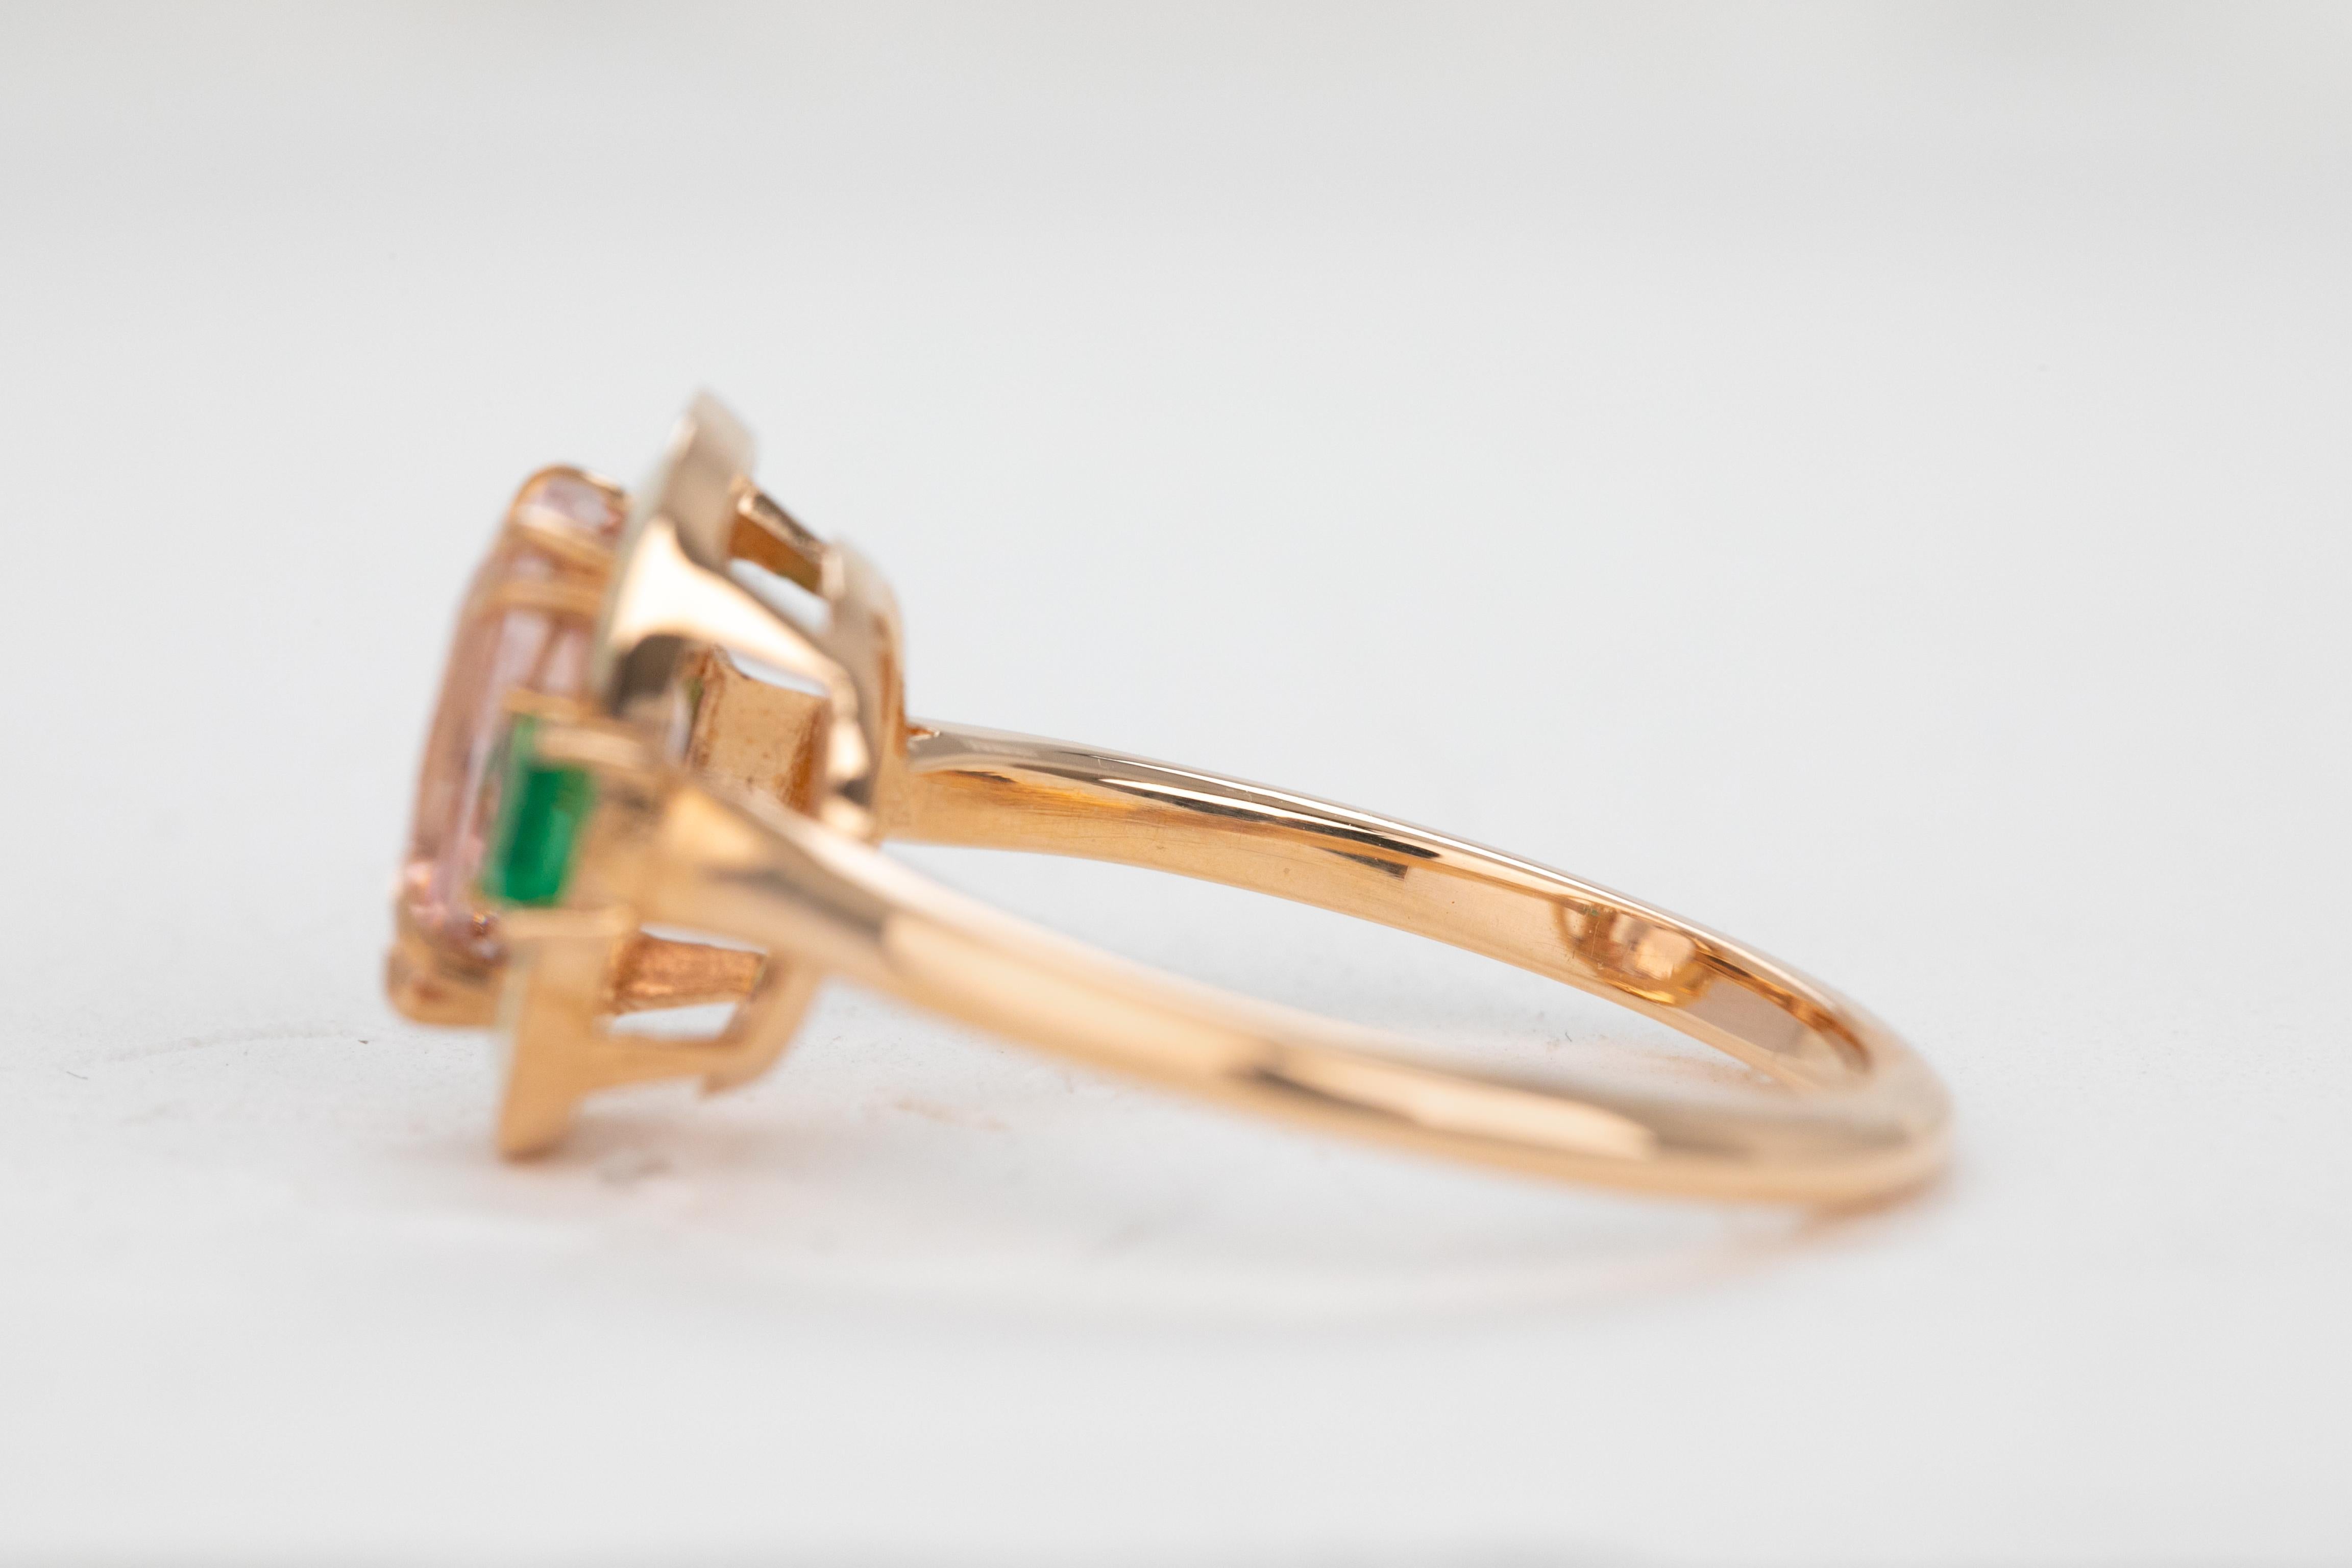 For Sale:  Artdeco Style, Enameled 14k Gold Morganite and Emerald Cocktail Ring 7